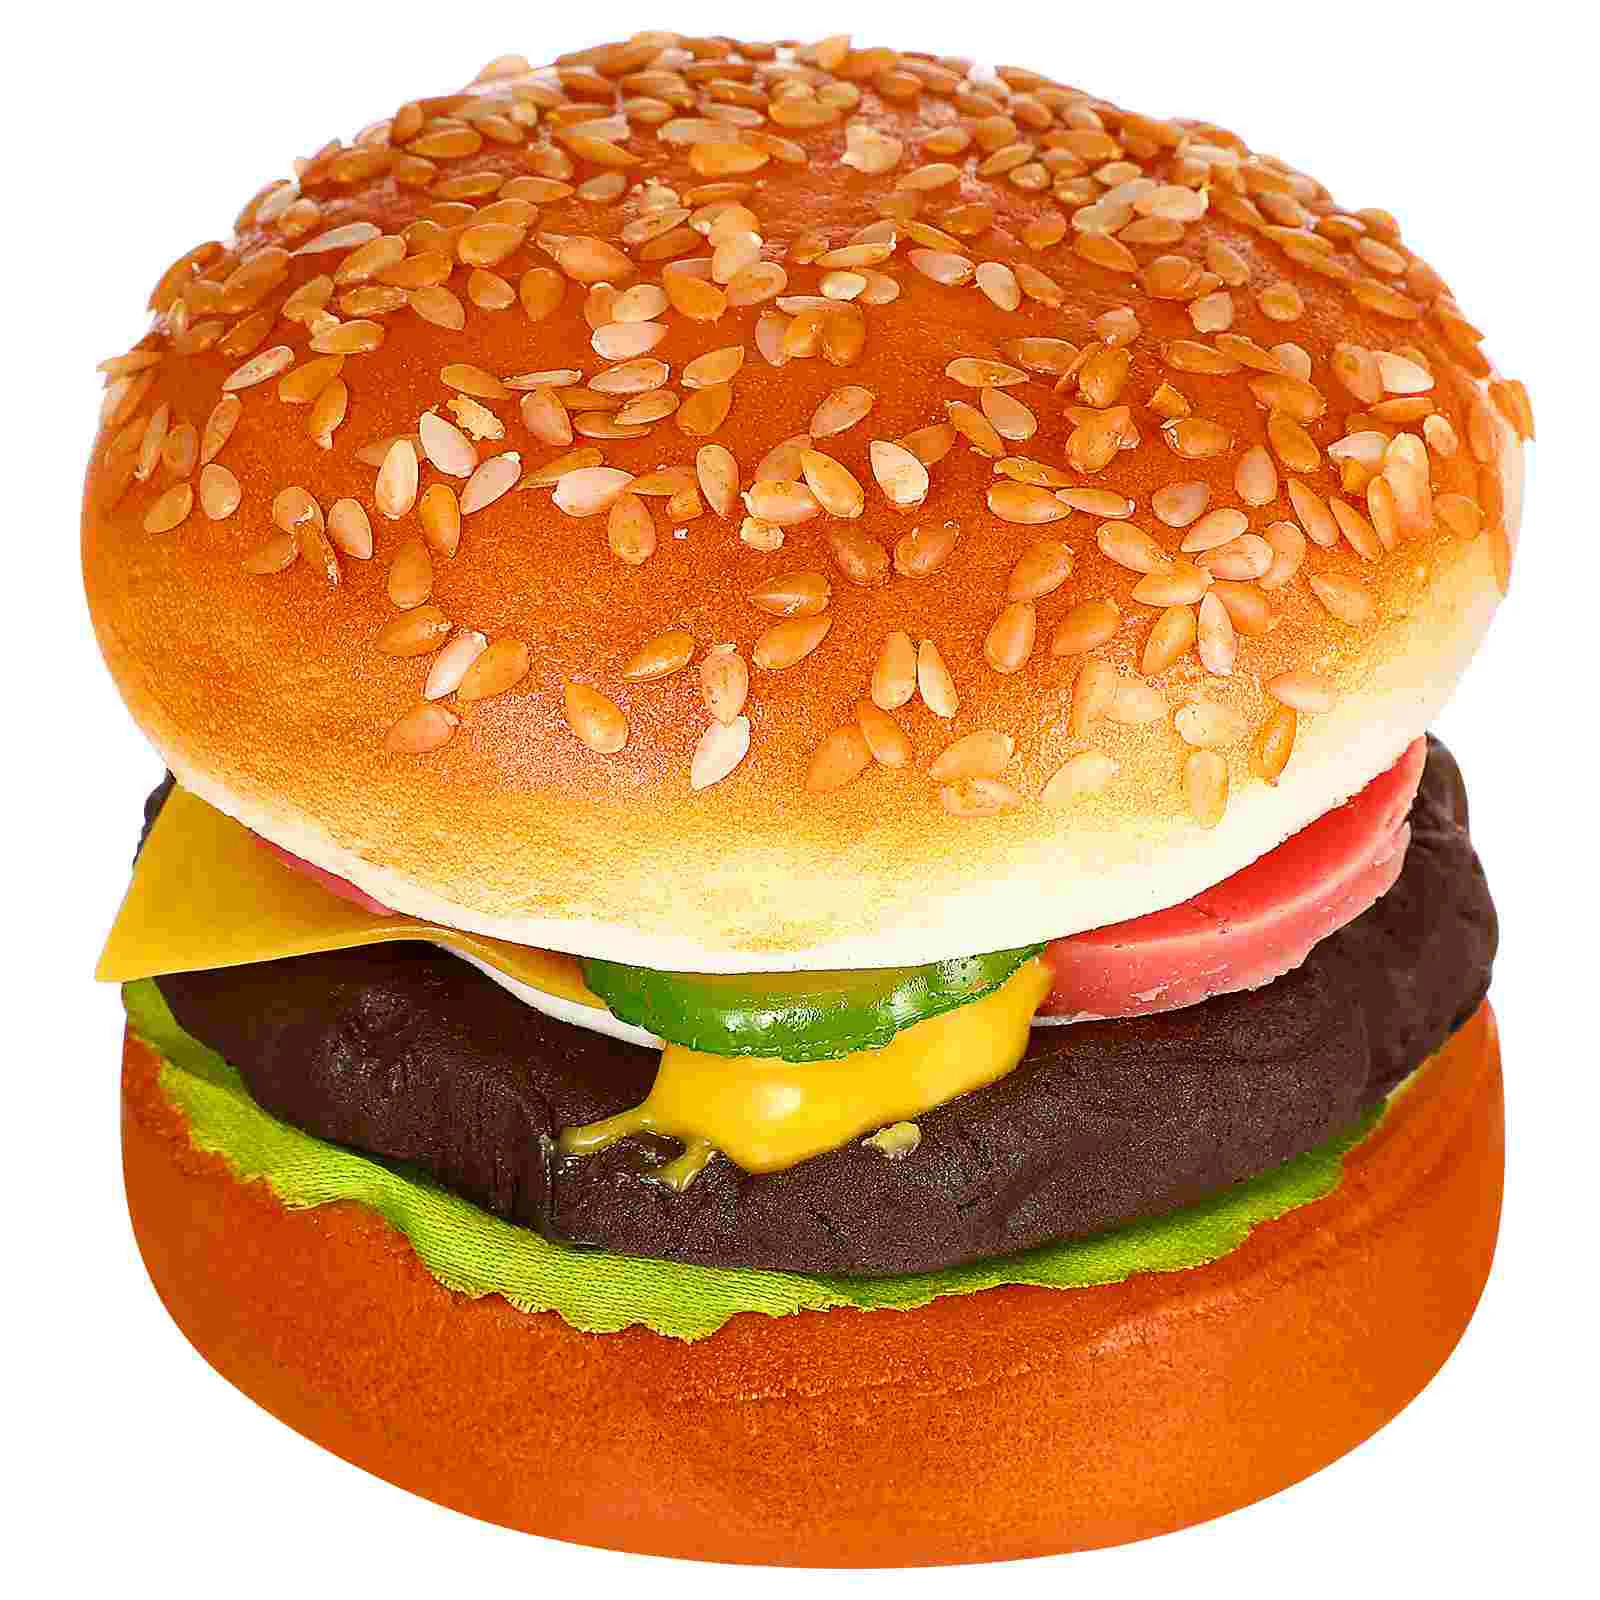 

Simulation Beef Burger Cake Decor Fake Models Decorations Party Photo Props PU Burgers Delicate Child